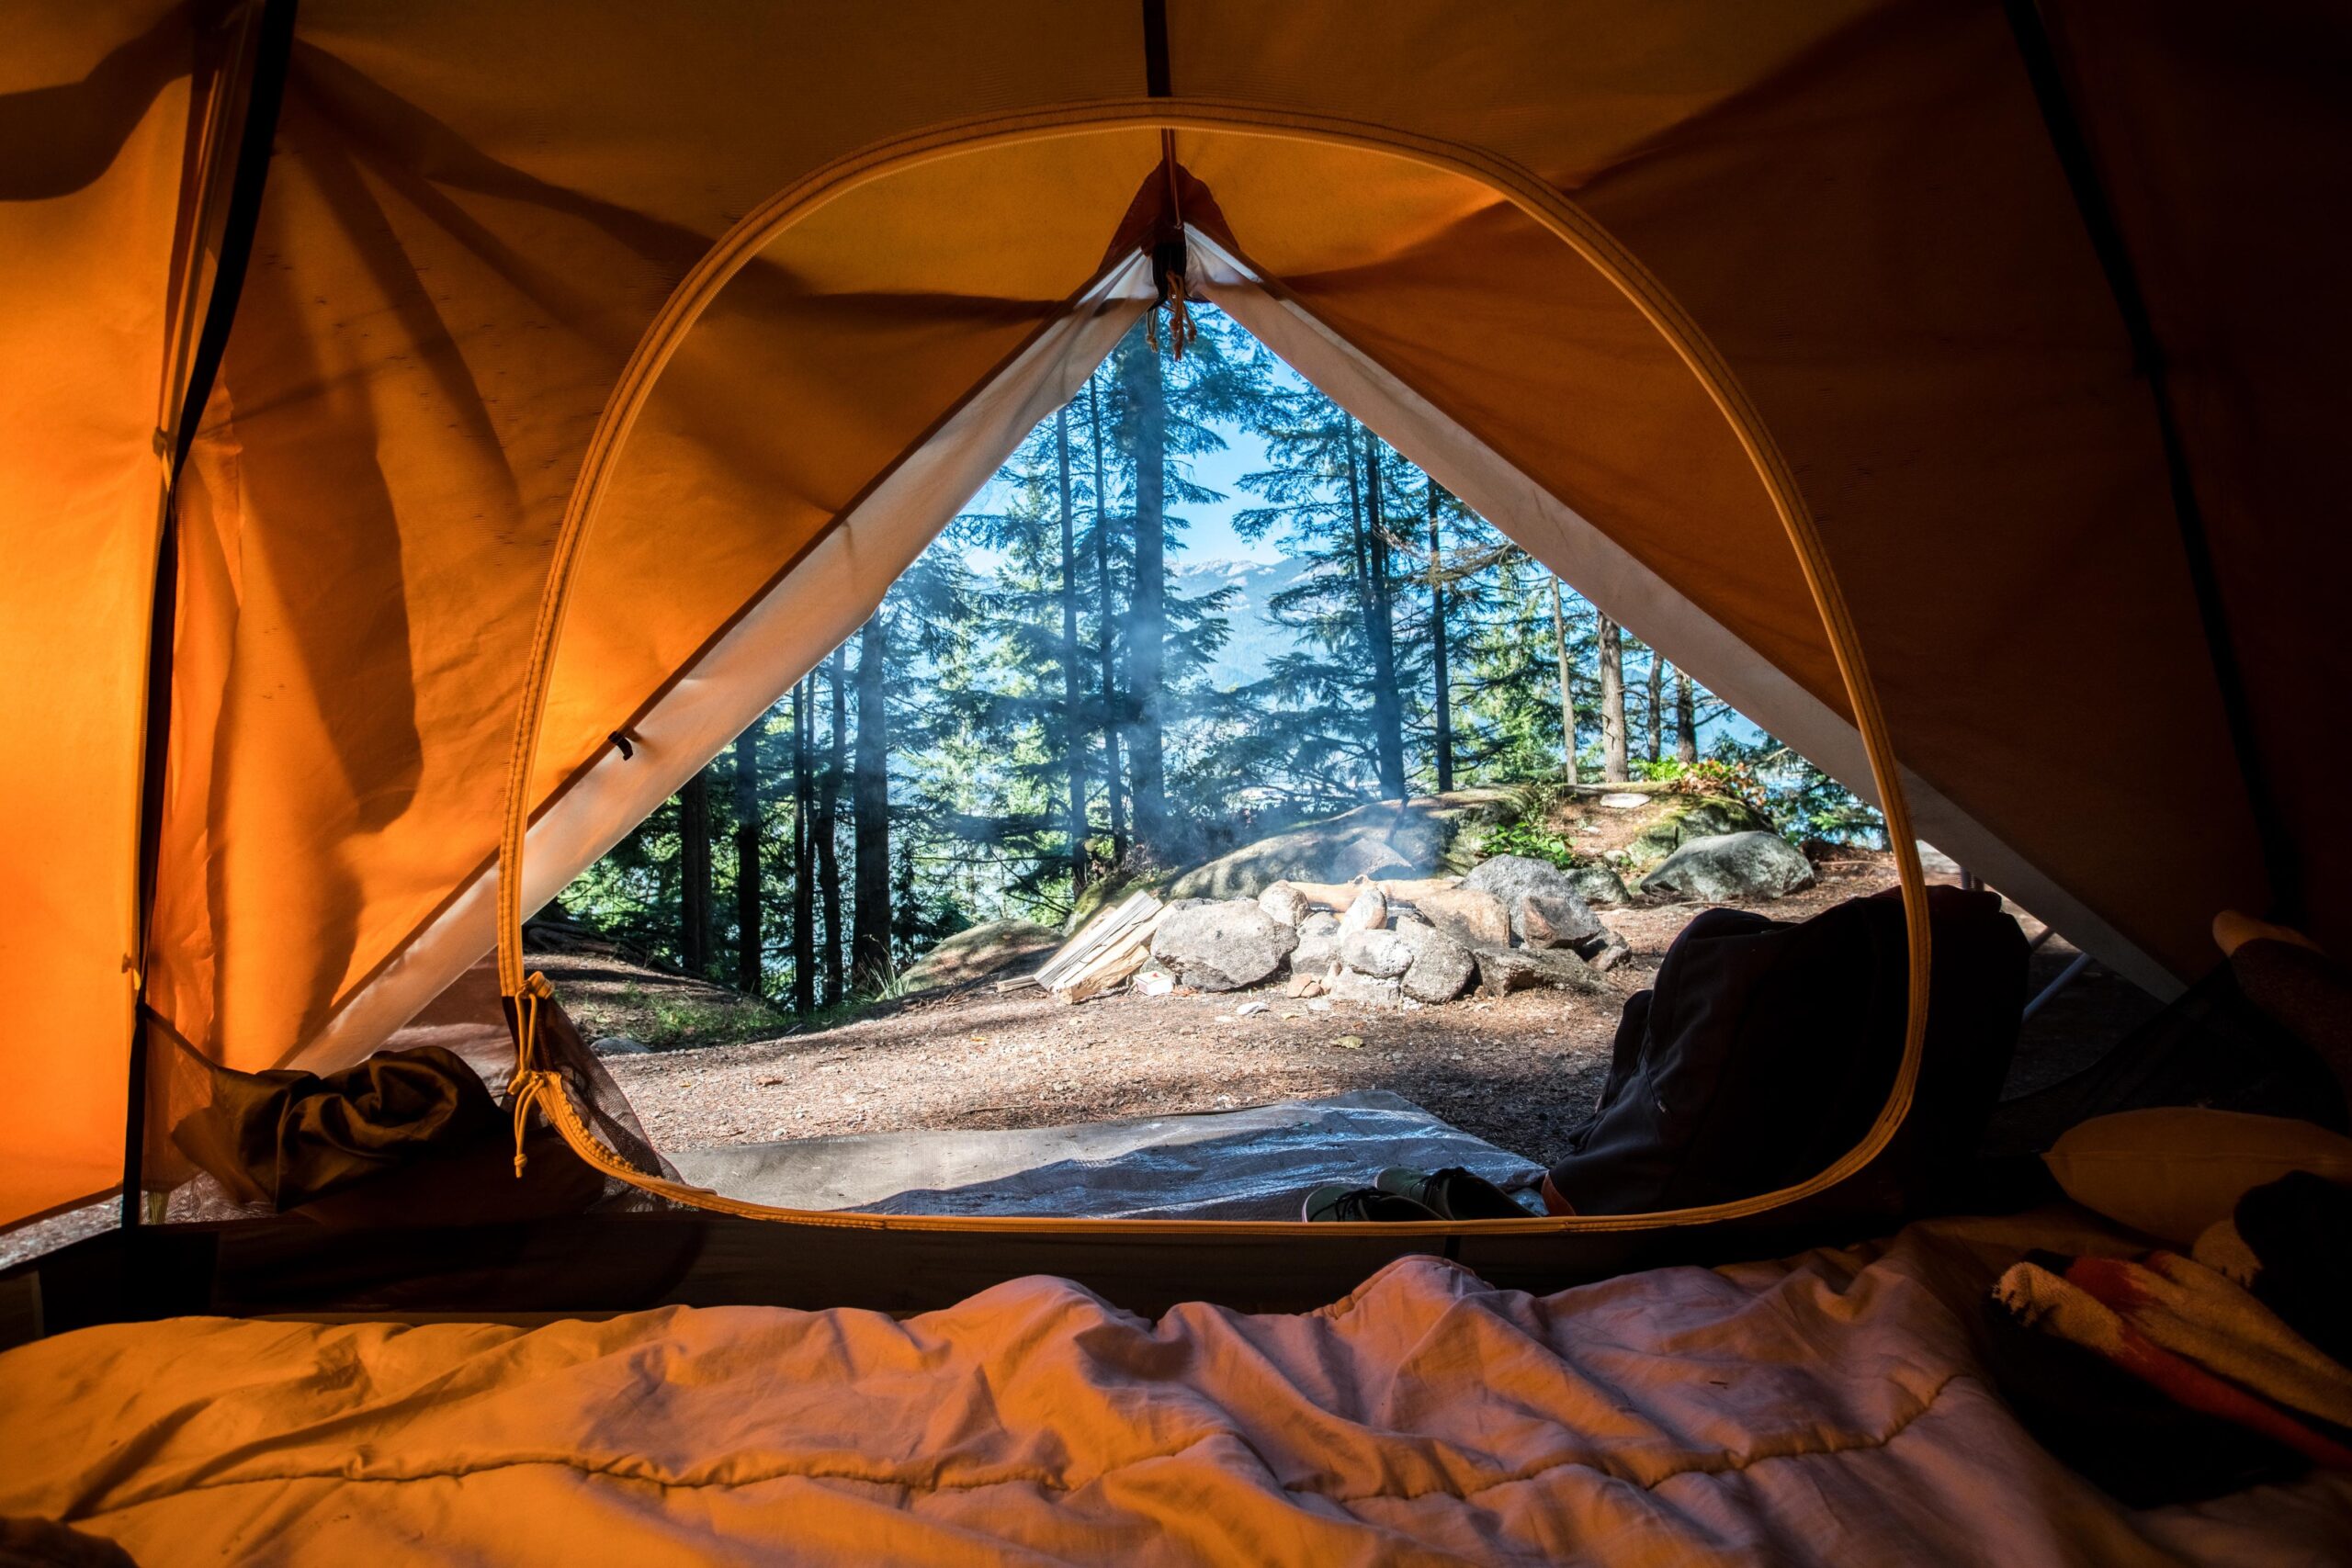 Tent, trees, camping